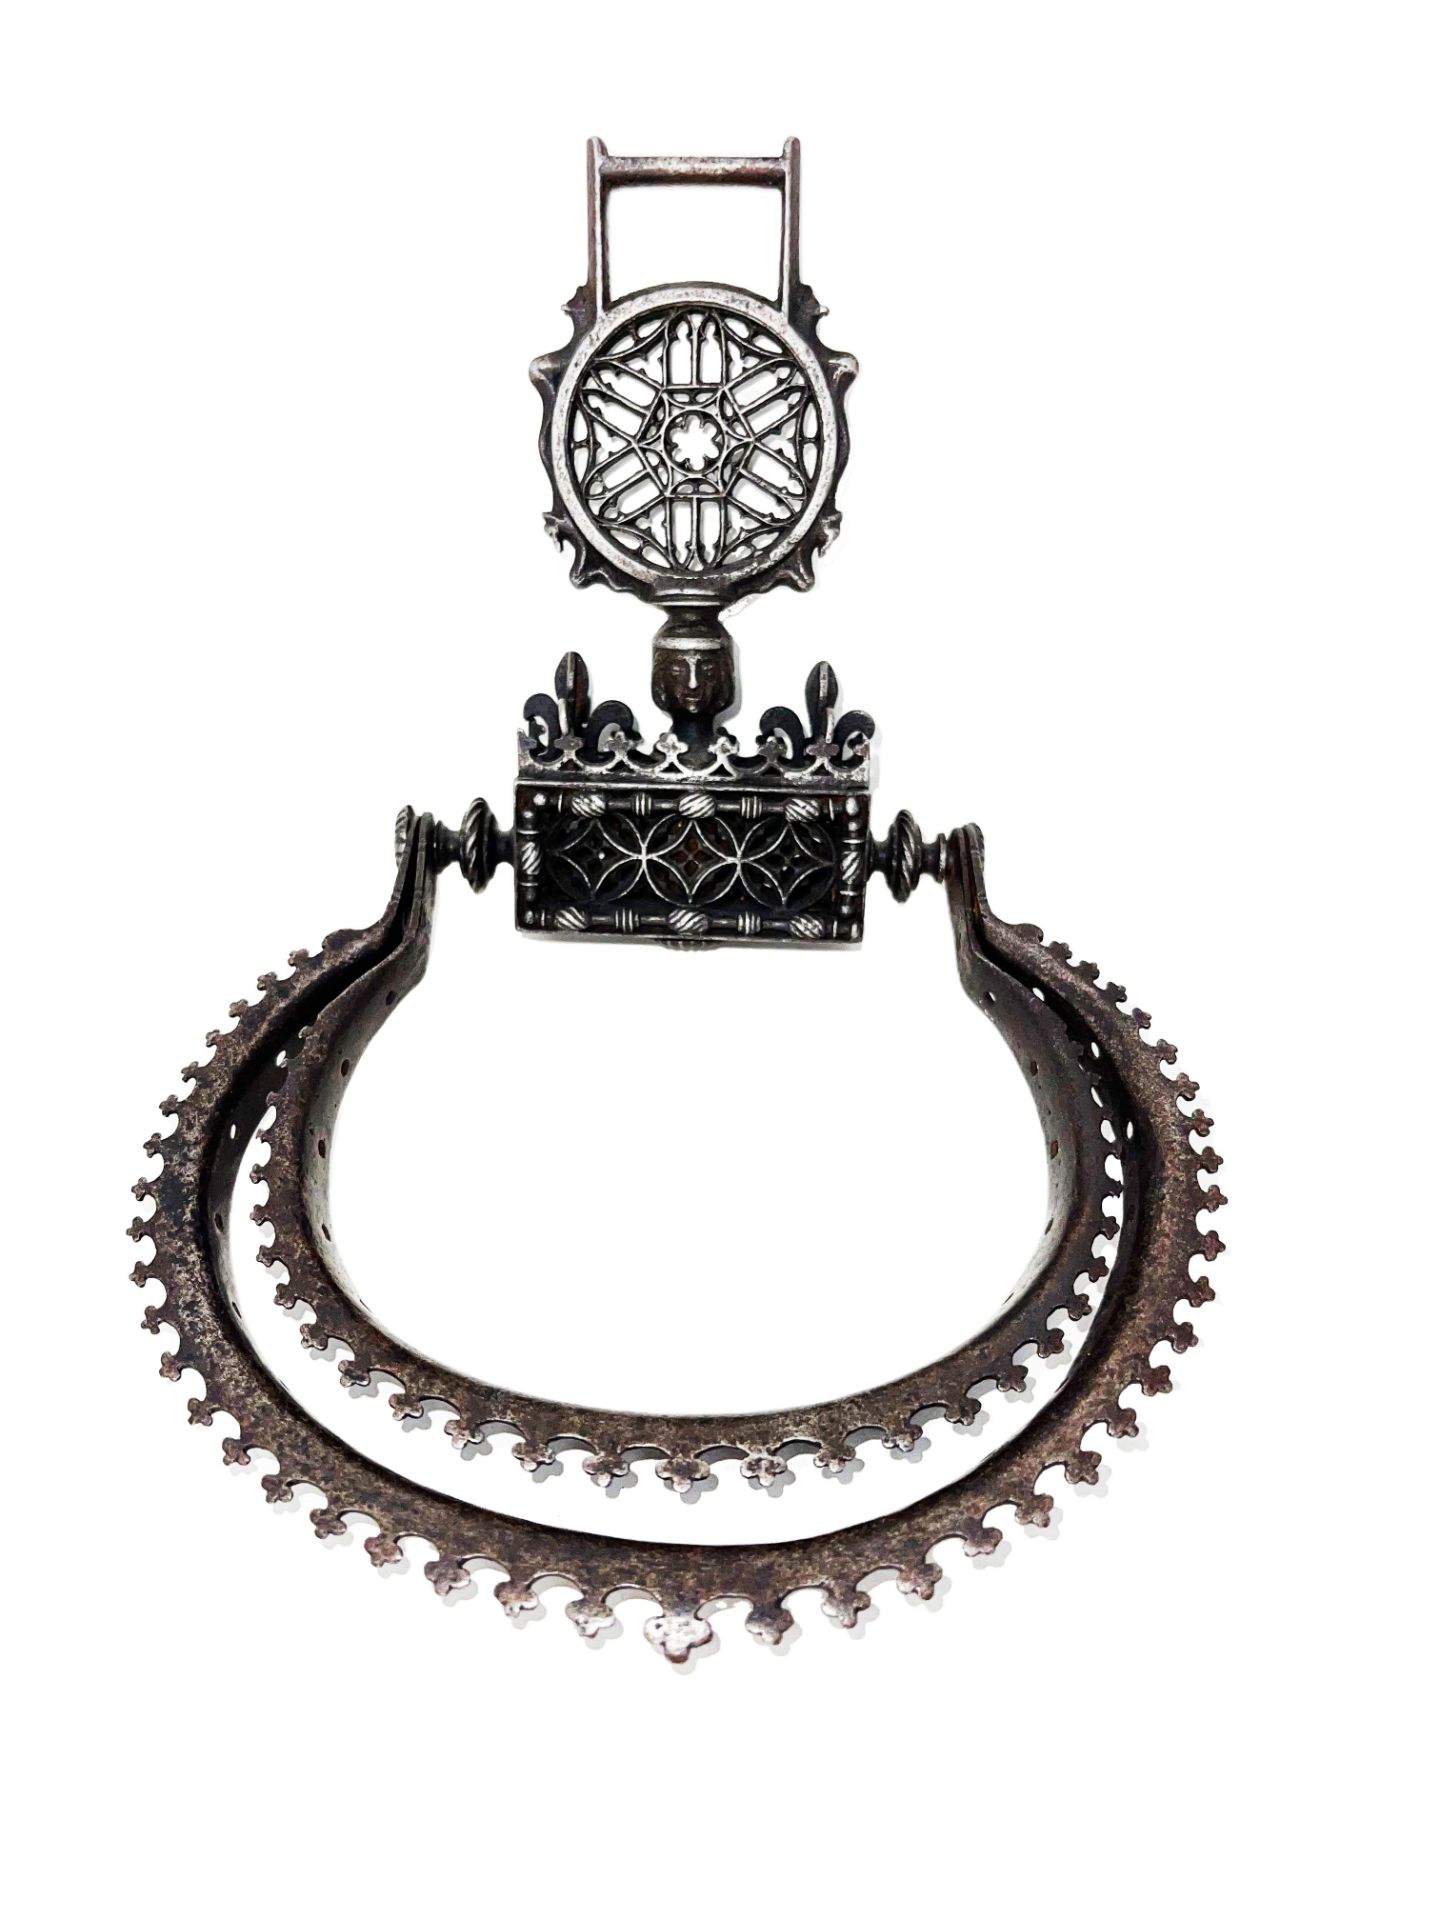 Neo-Gothic iron escarcella mount with two rings, joined by a spacer forming an orbiting cage